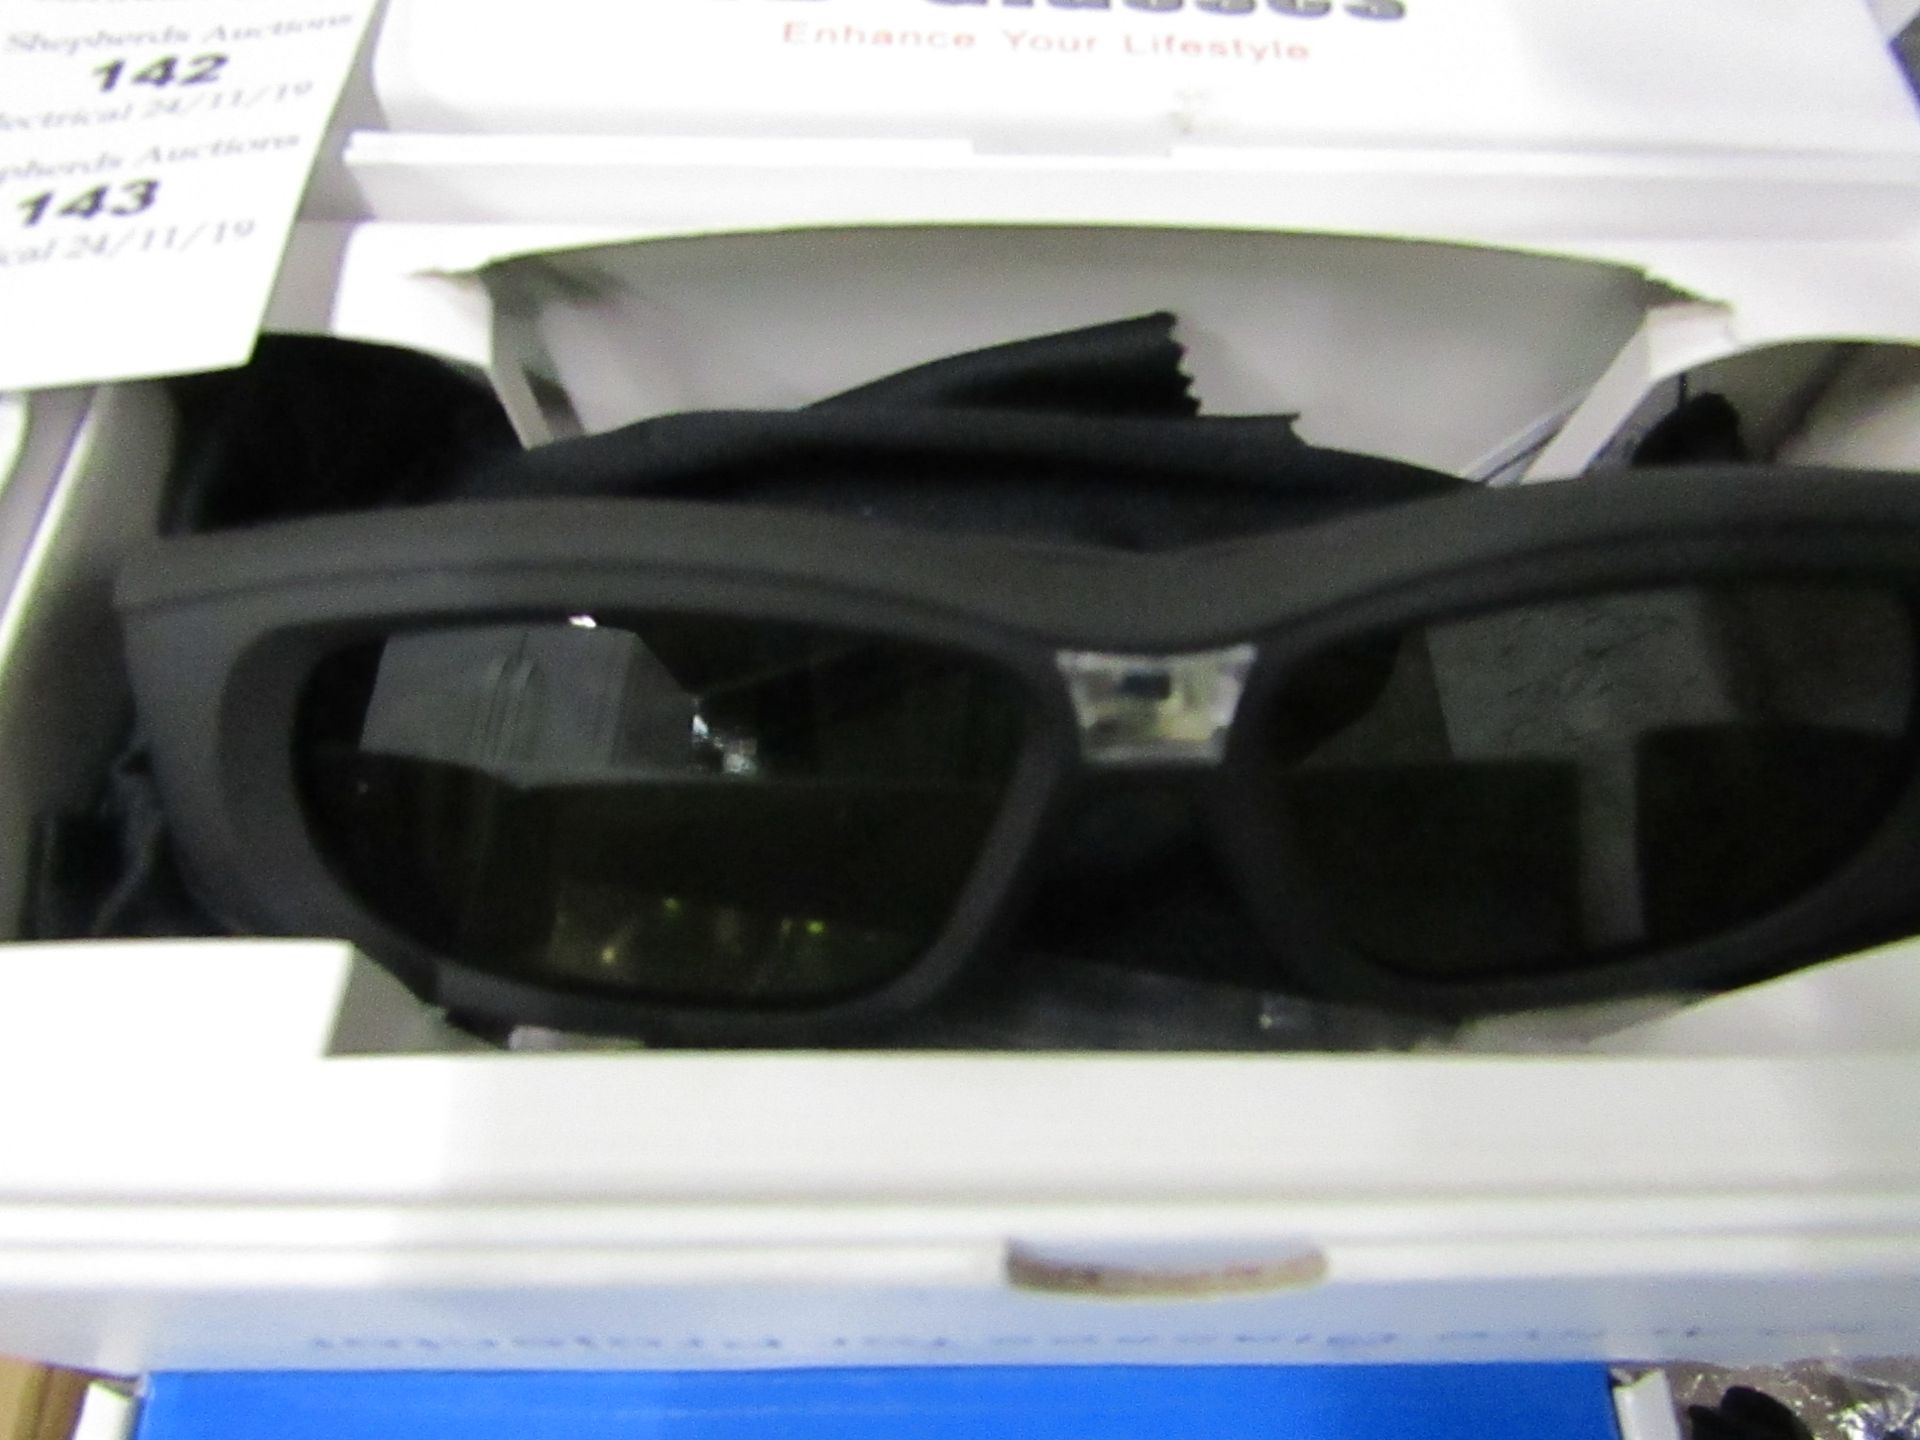 3D Active Glasses for Projector, new & Boxed.